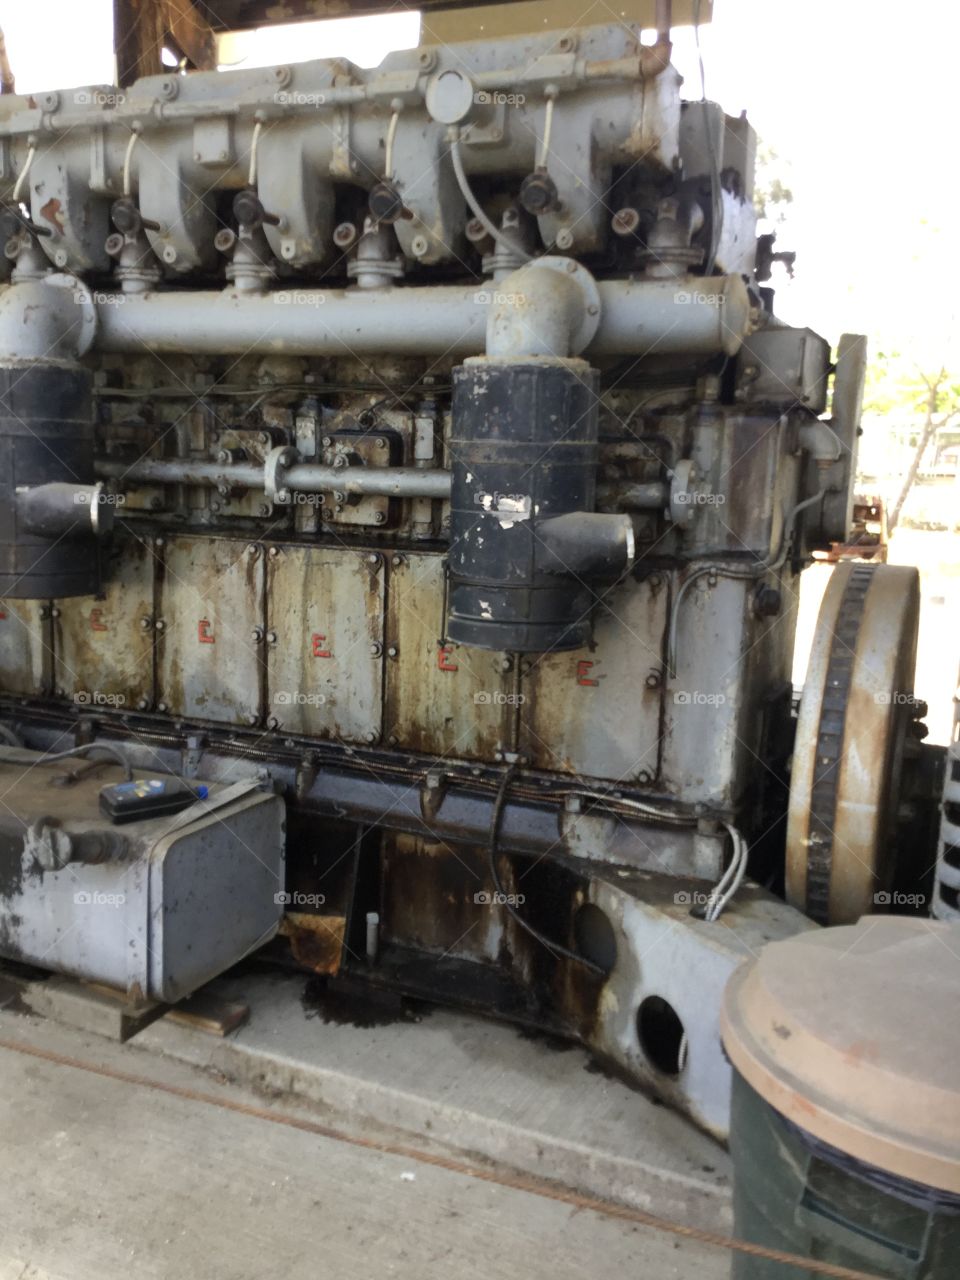 This engine was built in the early 1970 to power a massive generator in California it is no longer in use but is being restored it weighs over 33 tons and was powered by Diesel fuel